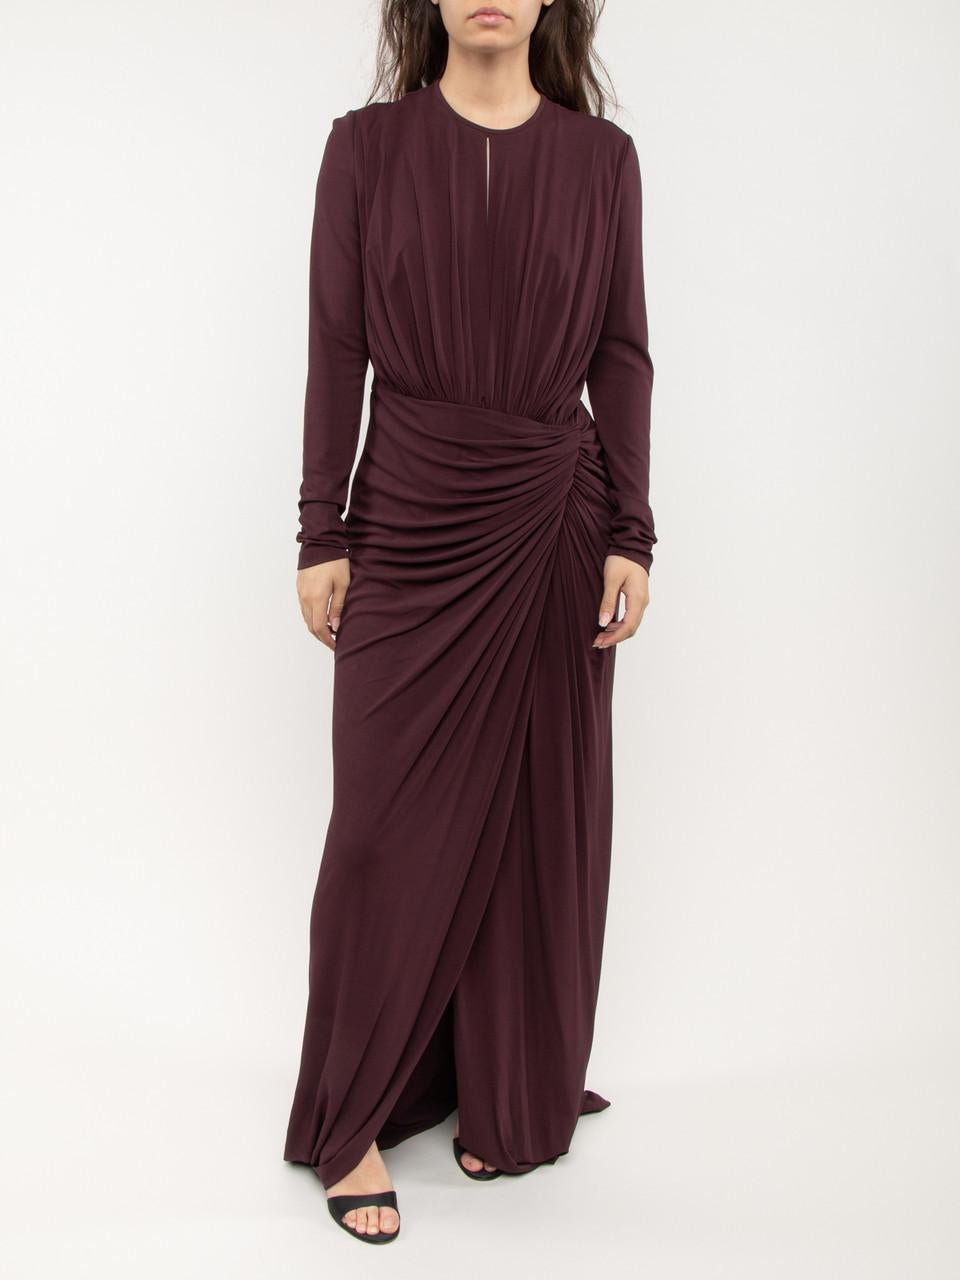 CONDITION is Very good. Minimal wear and pilling to dress is evident on this used Givenchy designer resale item. Details Purple Viscose Maxi dress Figure hugging Long sleeves Slit on left aide of the dress Round neckline Zip up fastening on back